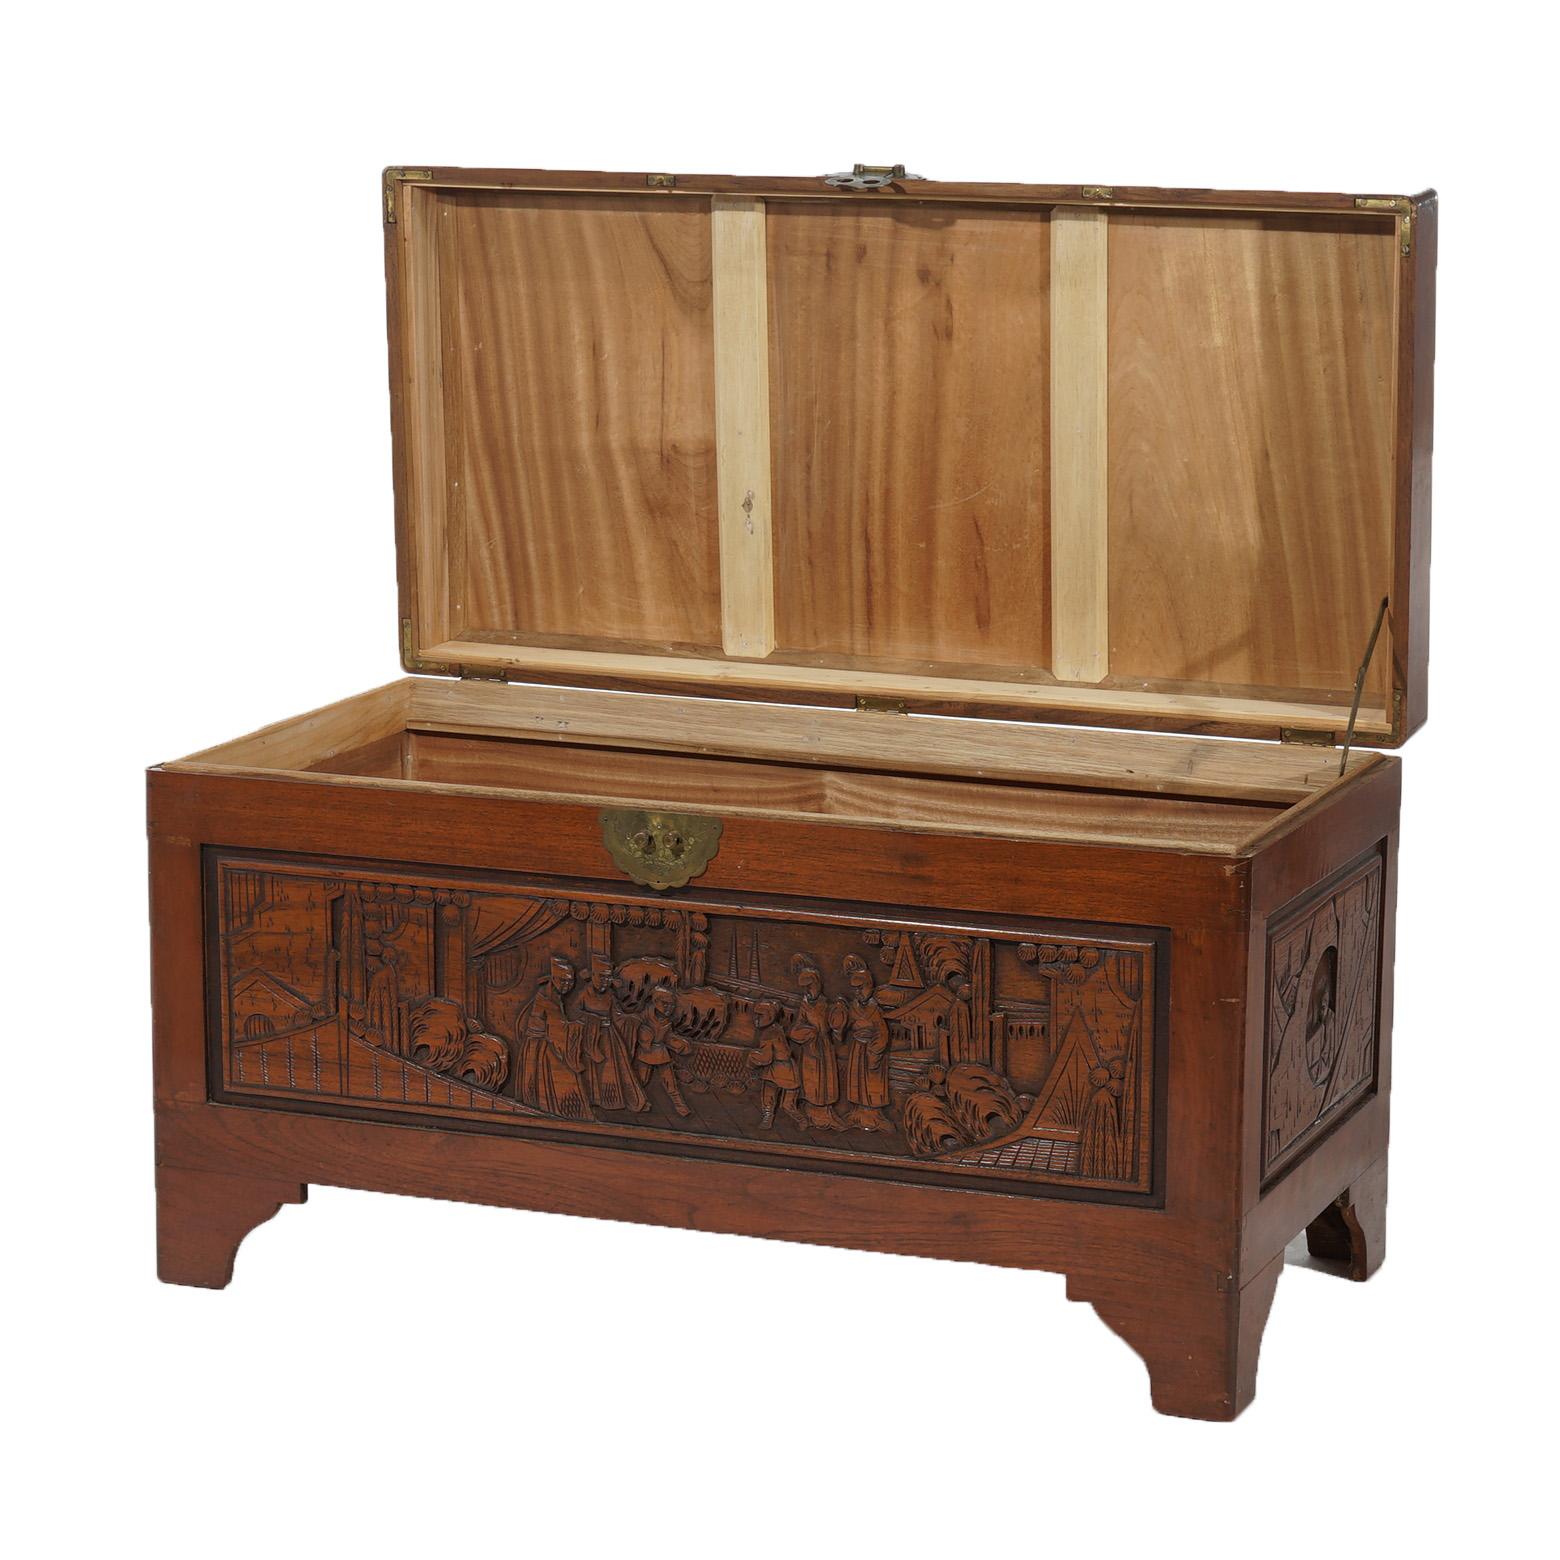 Chinese Carved Hardwood Figural Blanket Chest with Street Scene in Relief 20thC For Sale 3